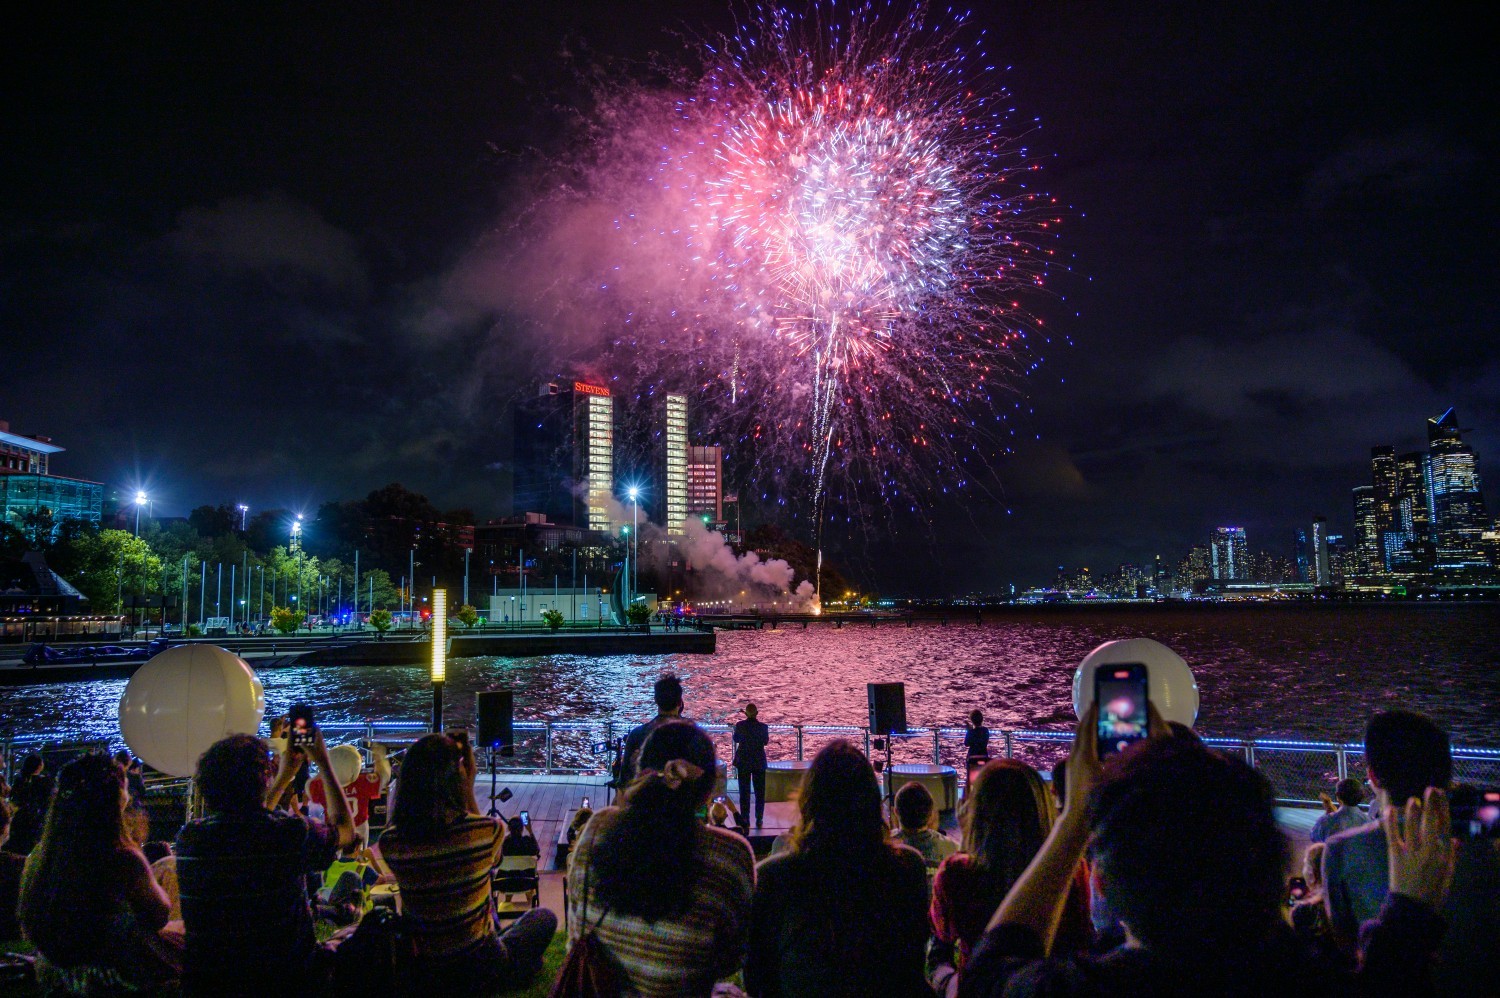 There is much to celebrate at Stevens. Here, the community enjoys fireworks over the Hudson River and campus.